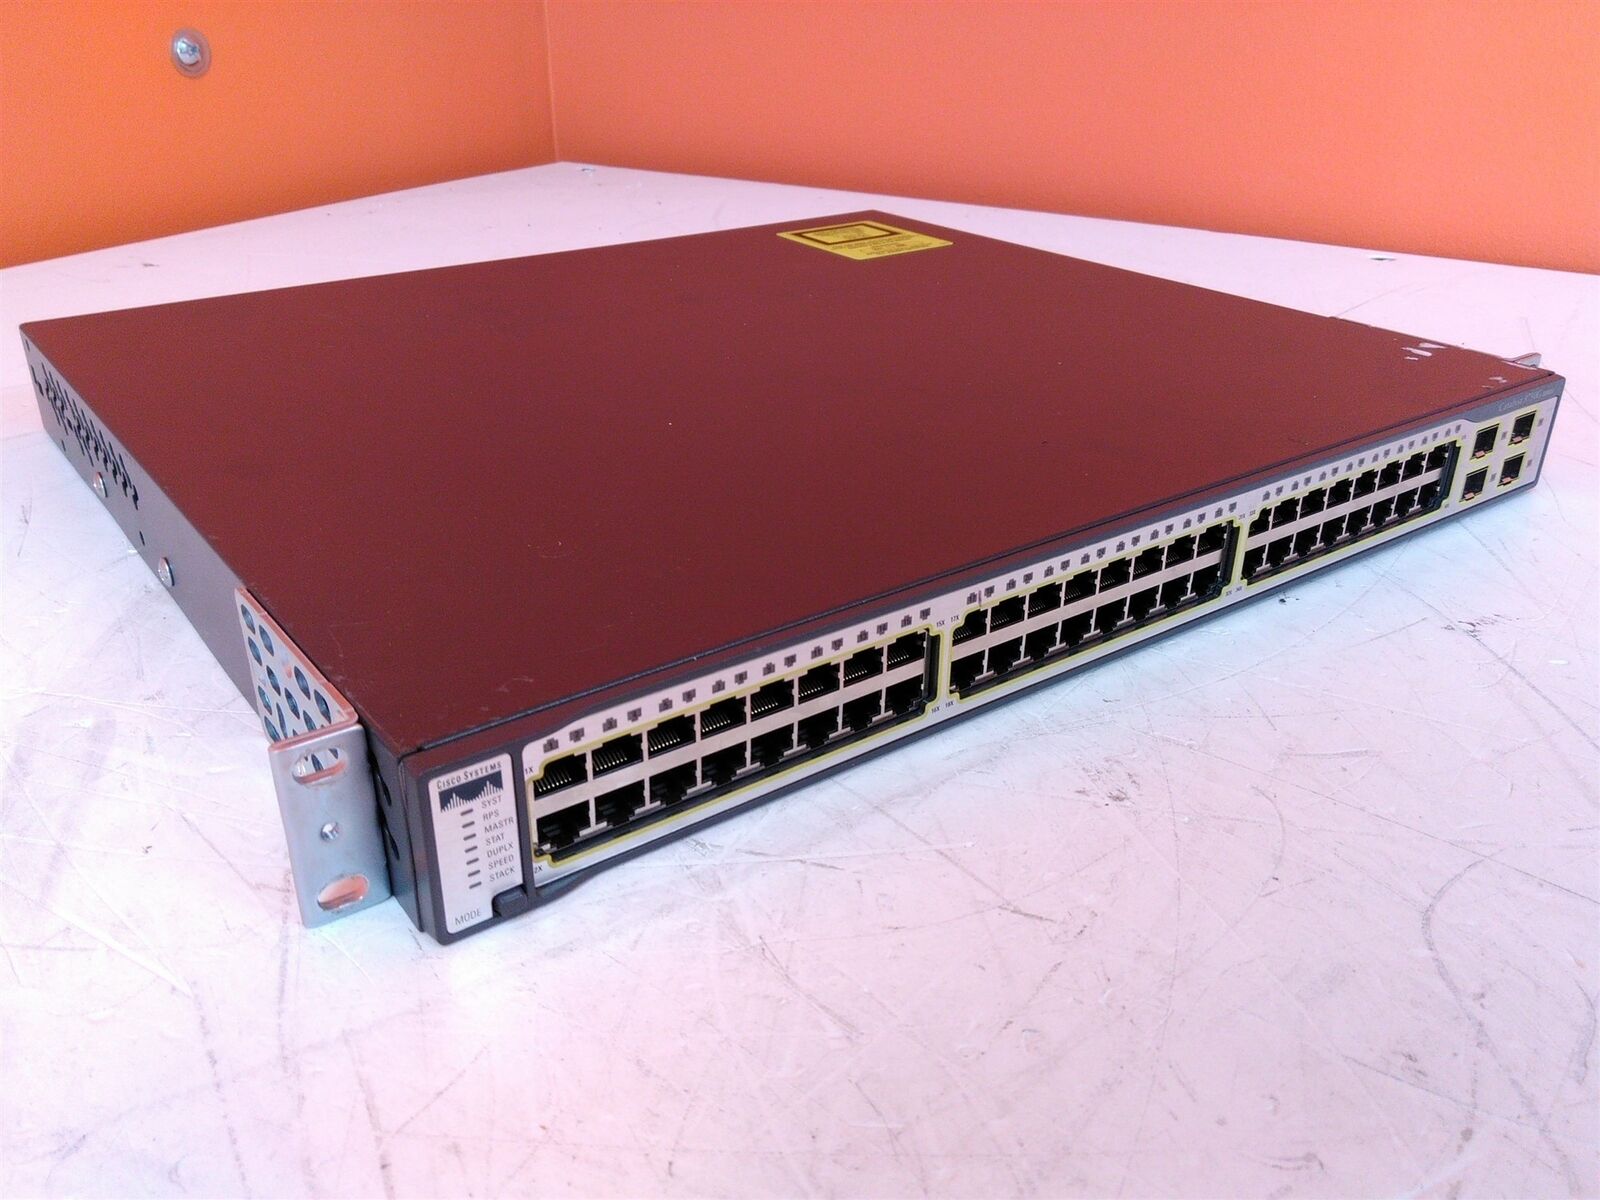 Cisco Catalyst WS-C3750G-48TS-S 48 Port Gigabit Ethernet Switch with Rack Ears